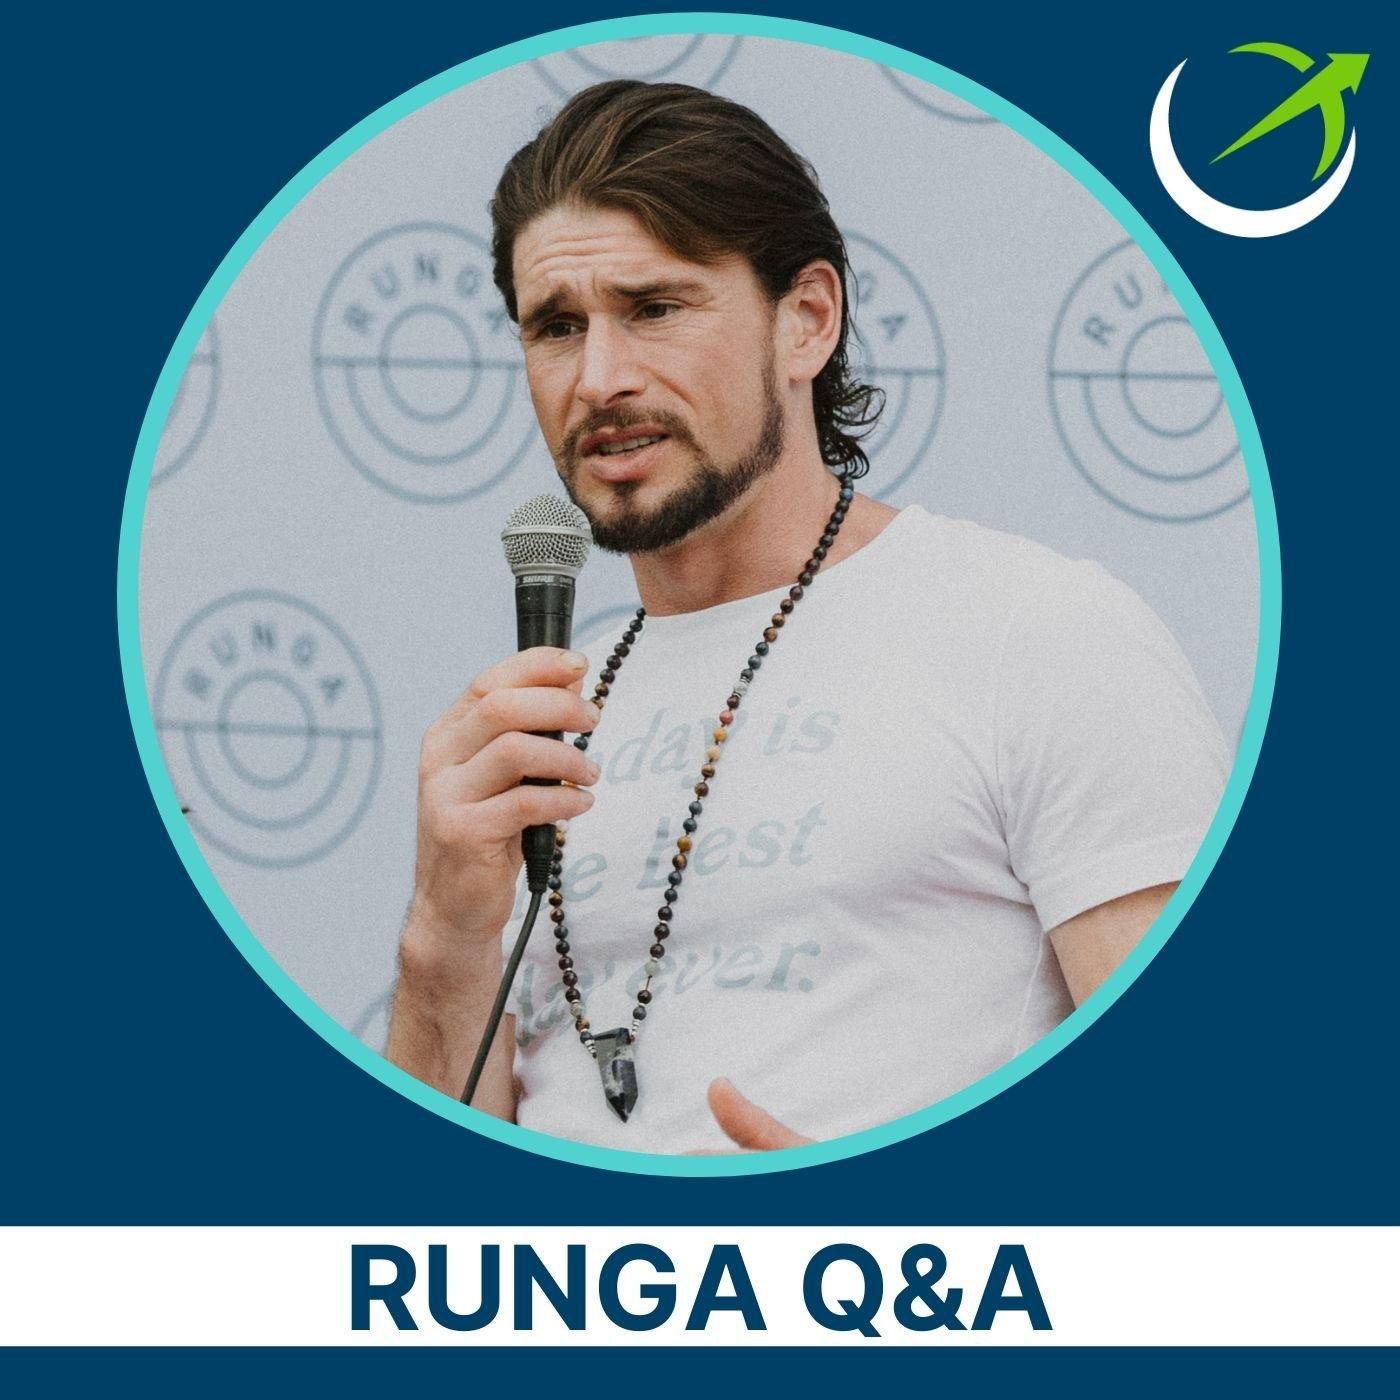 The Ultimate Detoxification Guide: How To Use Supplements, Saunas, Skin Brushing & More To Quickly & Safely Clean Up Your Body: An Official "Runga" Q&A